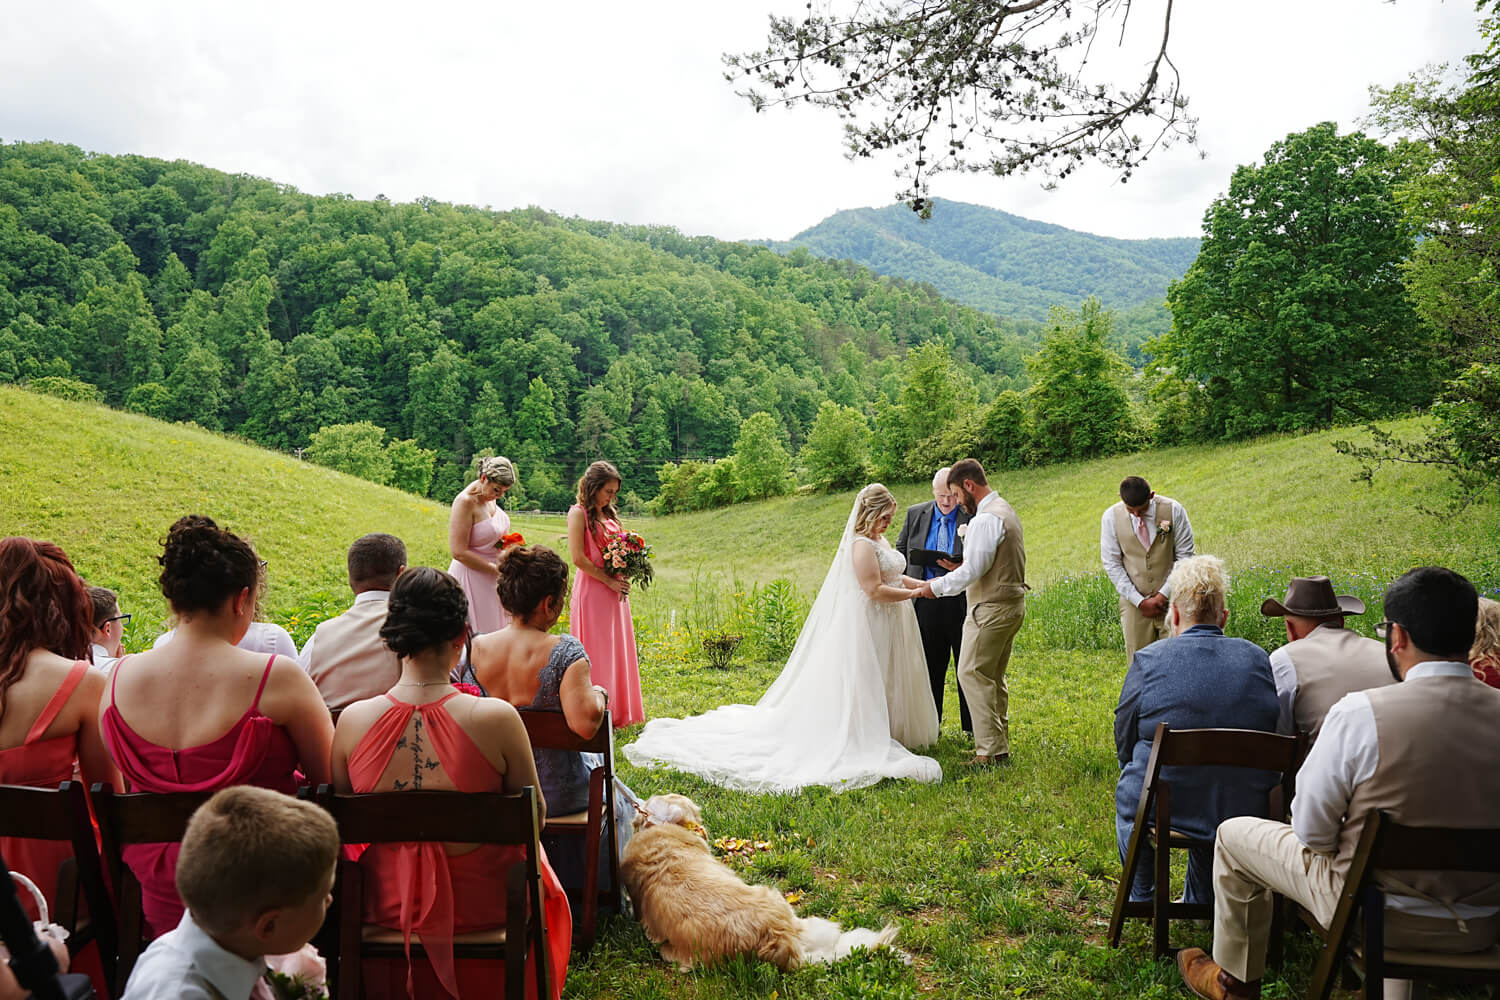 Wedding ceremony with guests in the spring at a mountain view in a meadow